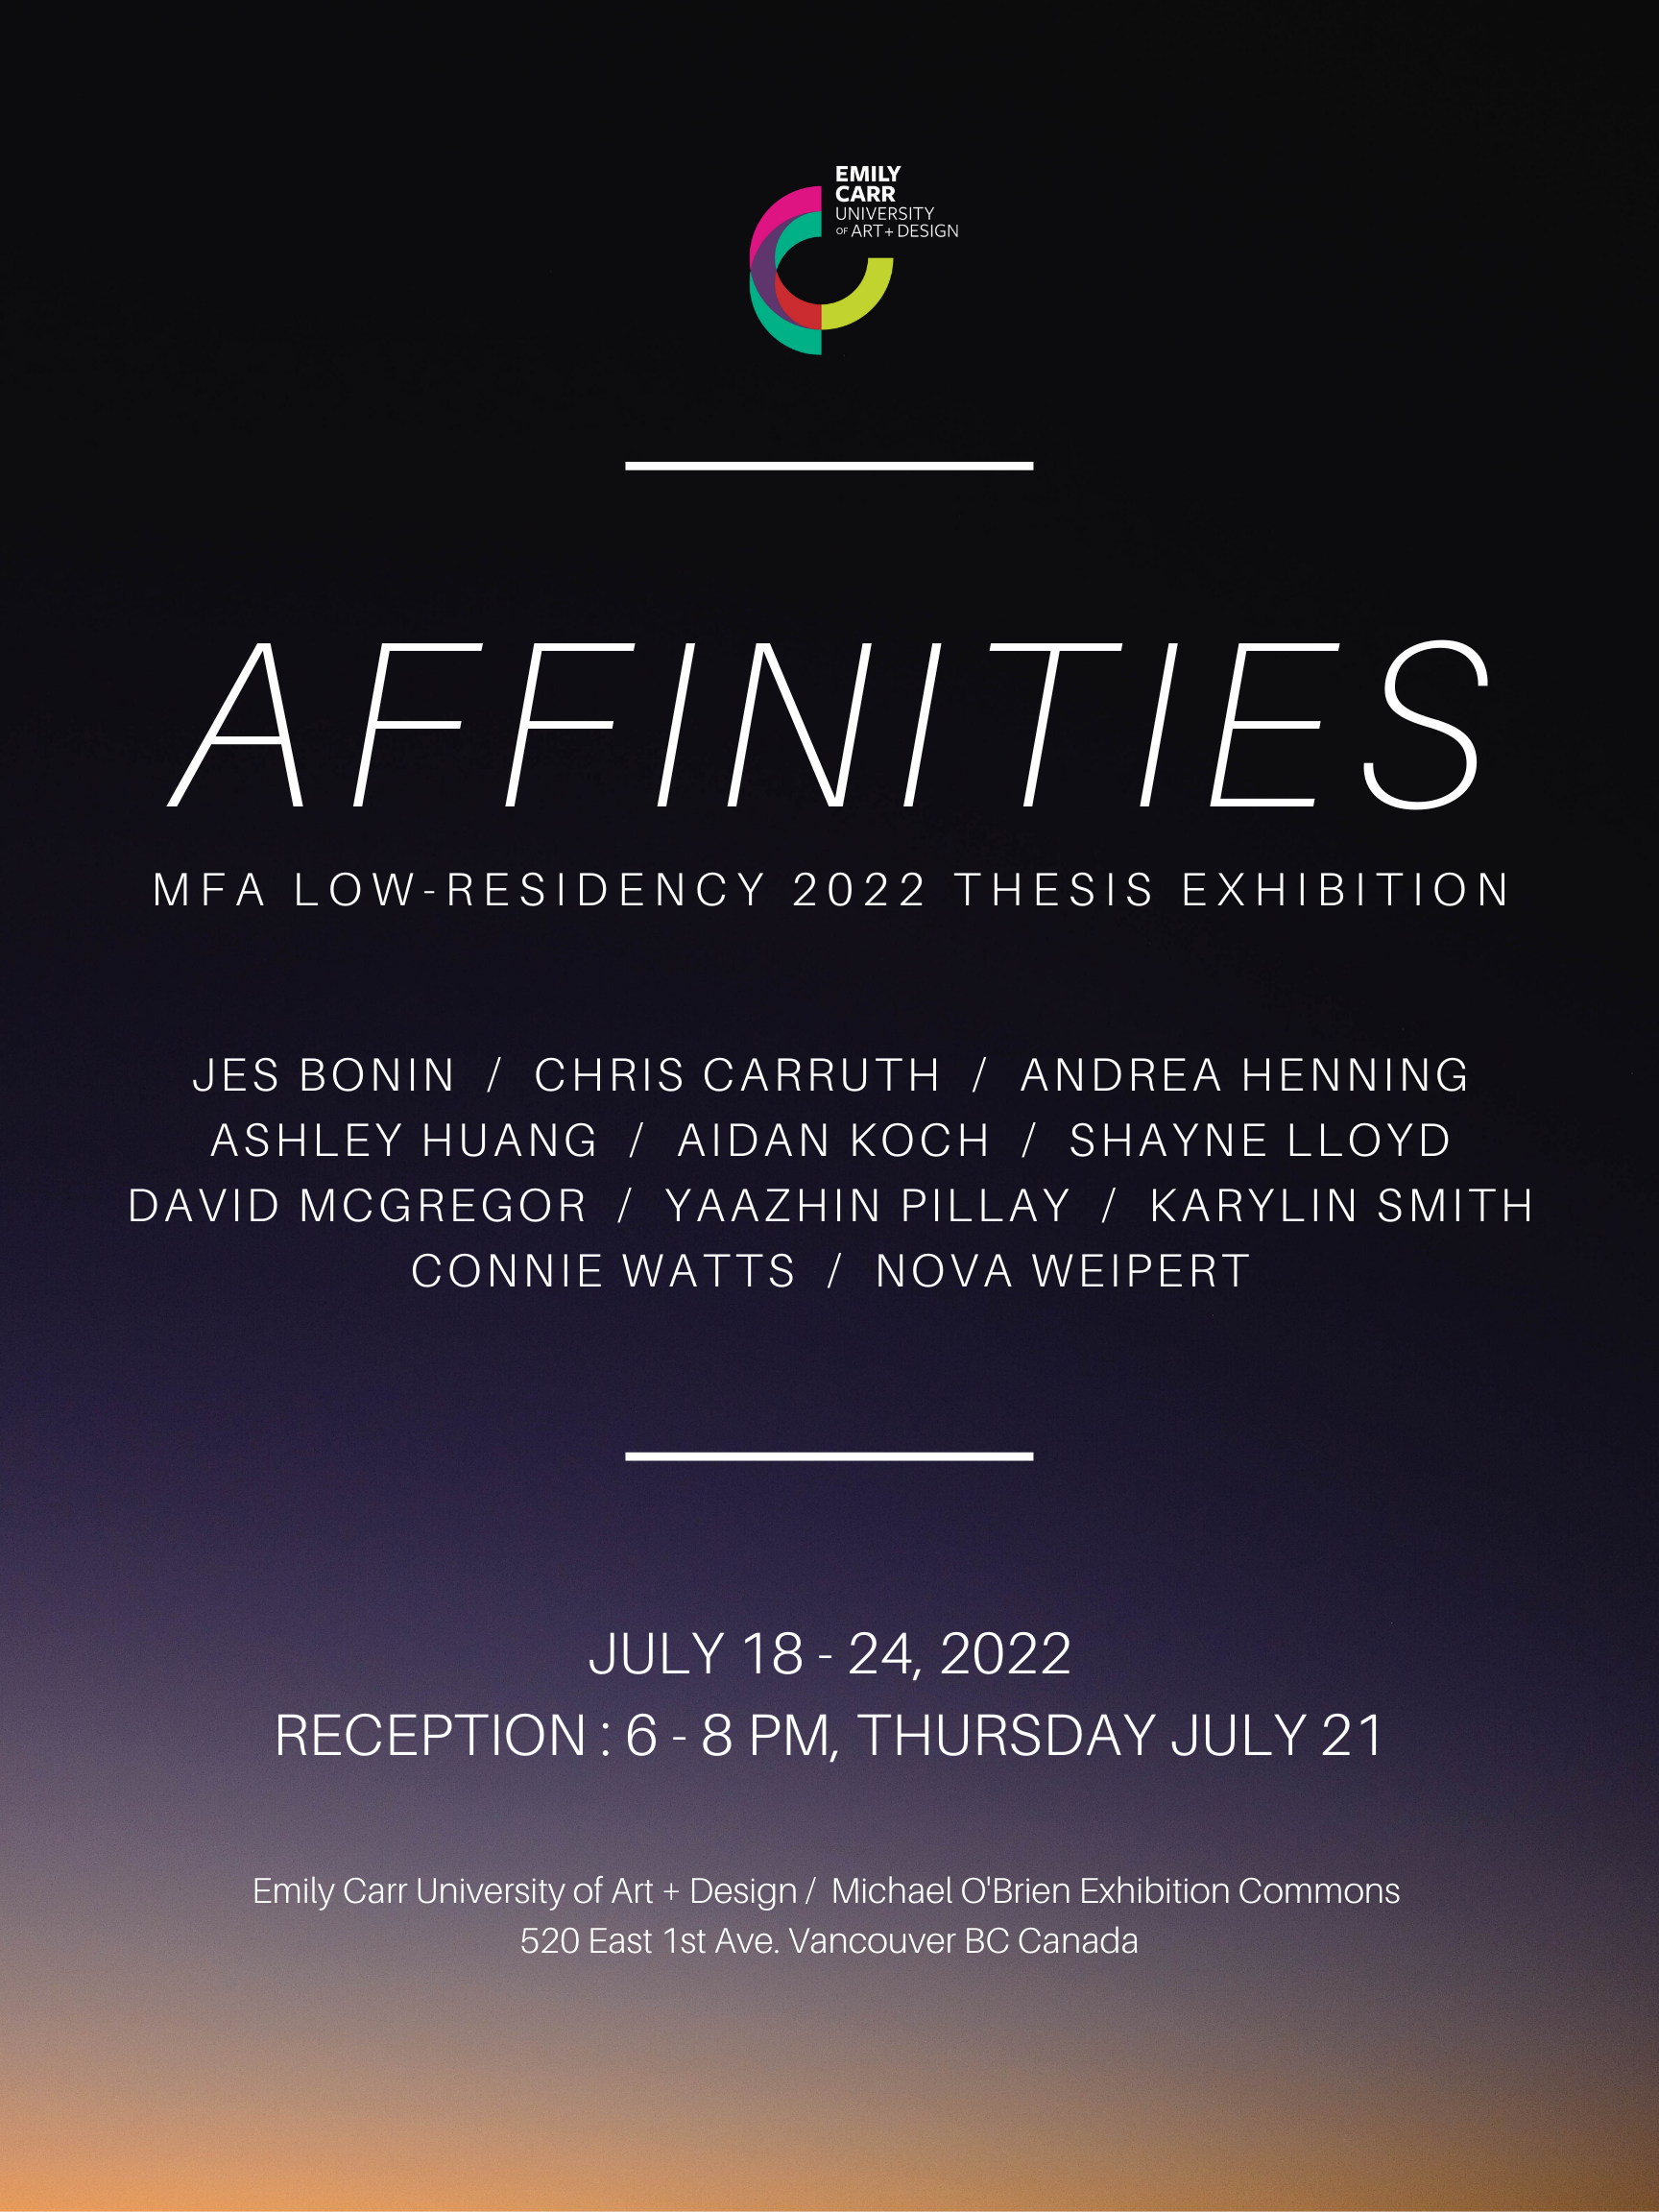 AFFINITIES MFA THESIS SHOW